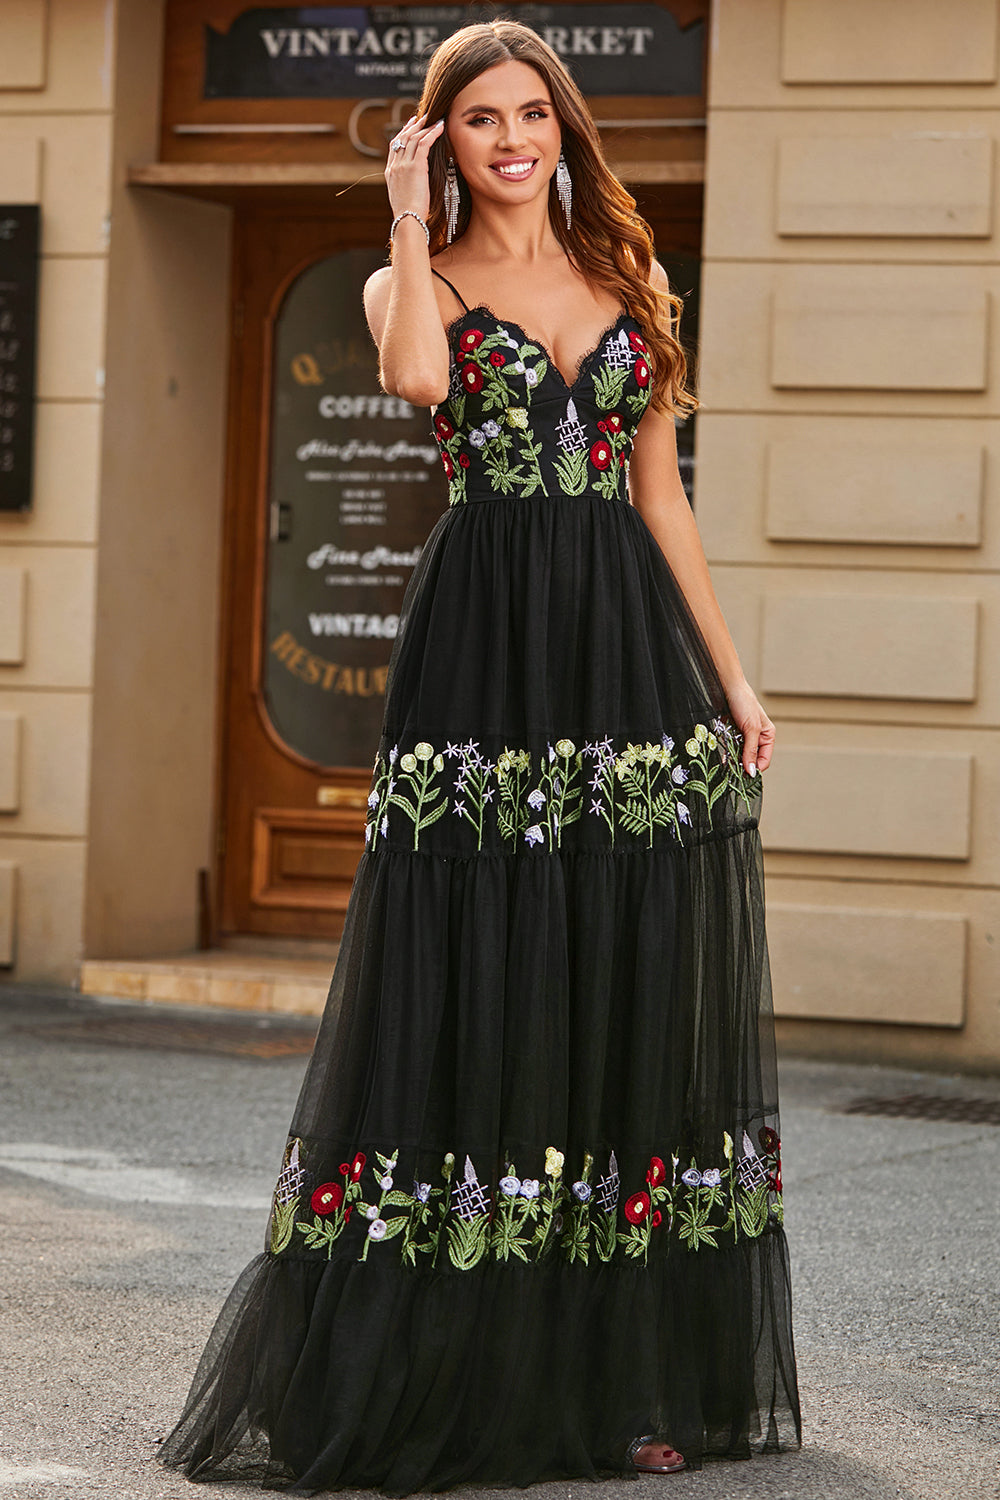 Gorgeous A Line Spaghetti Straps Black Long Prom Dress with Embroidery